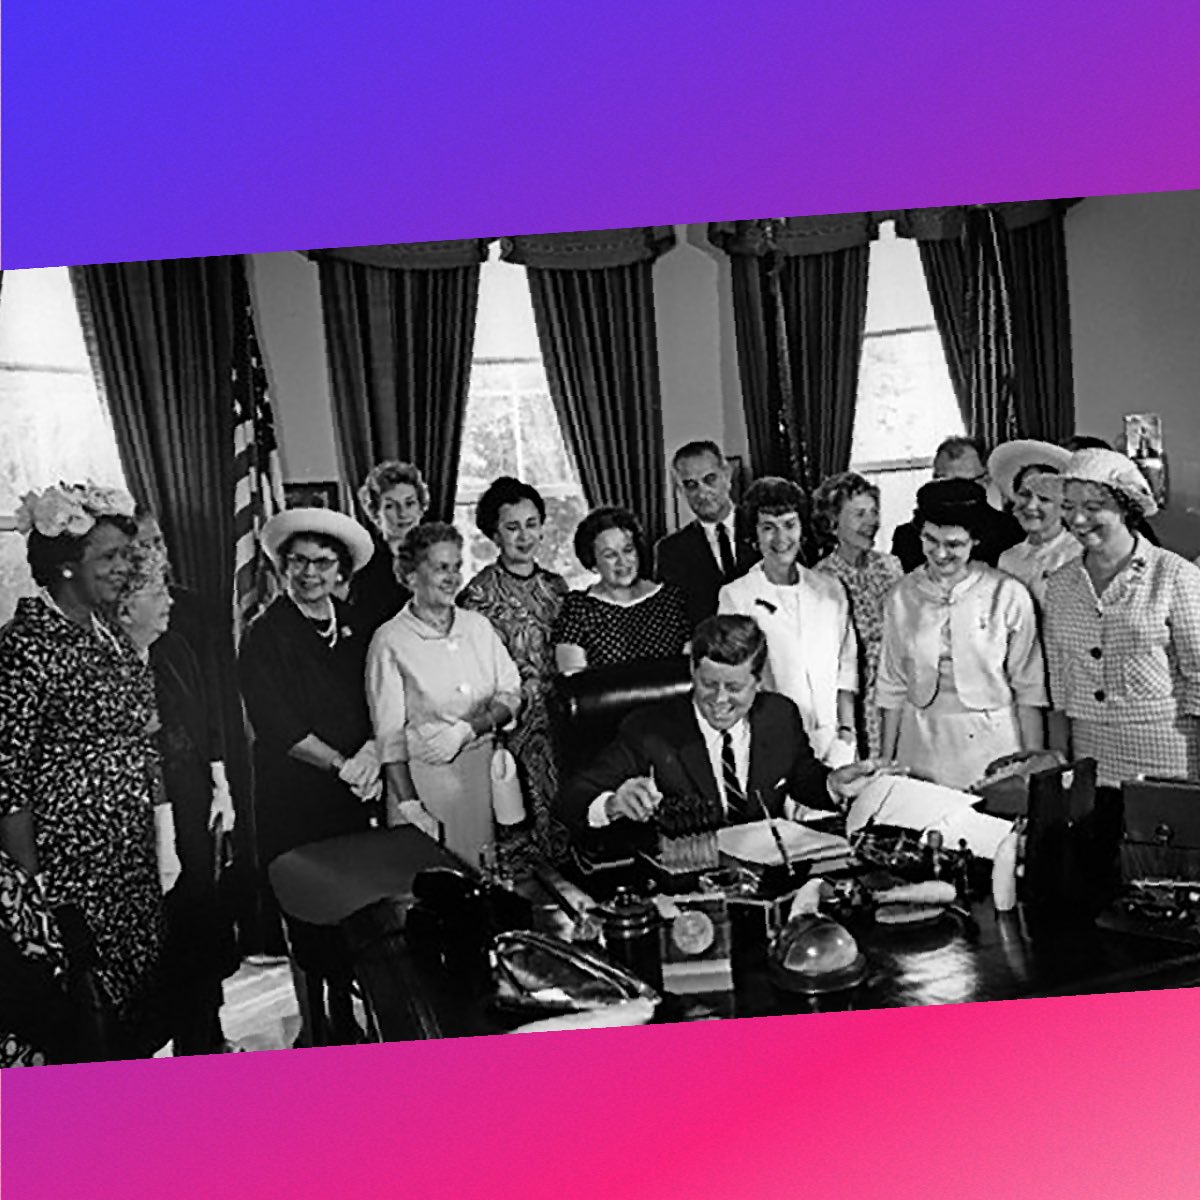 Today is the 60th anniversary of the #EqualPayAct, which helped pave the way for women’s economic advancement. But our work is far from over. 

Today, women continue to face a pay gap – earning 82 cents for every $1 a man earns. And that gap is even wider for communities of